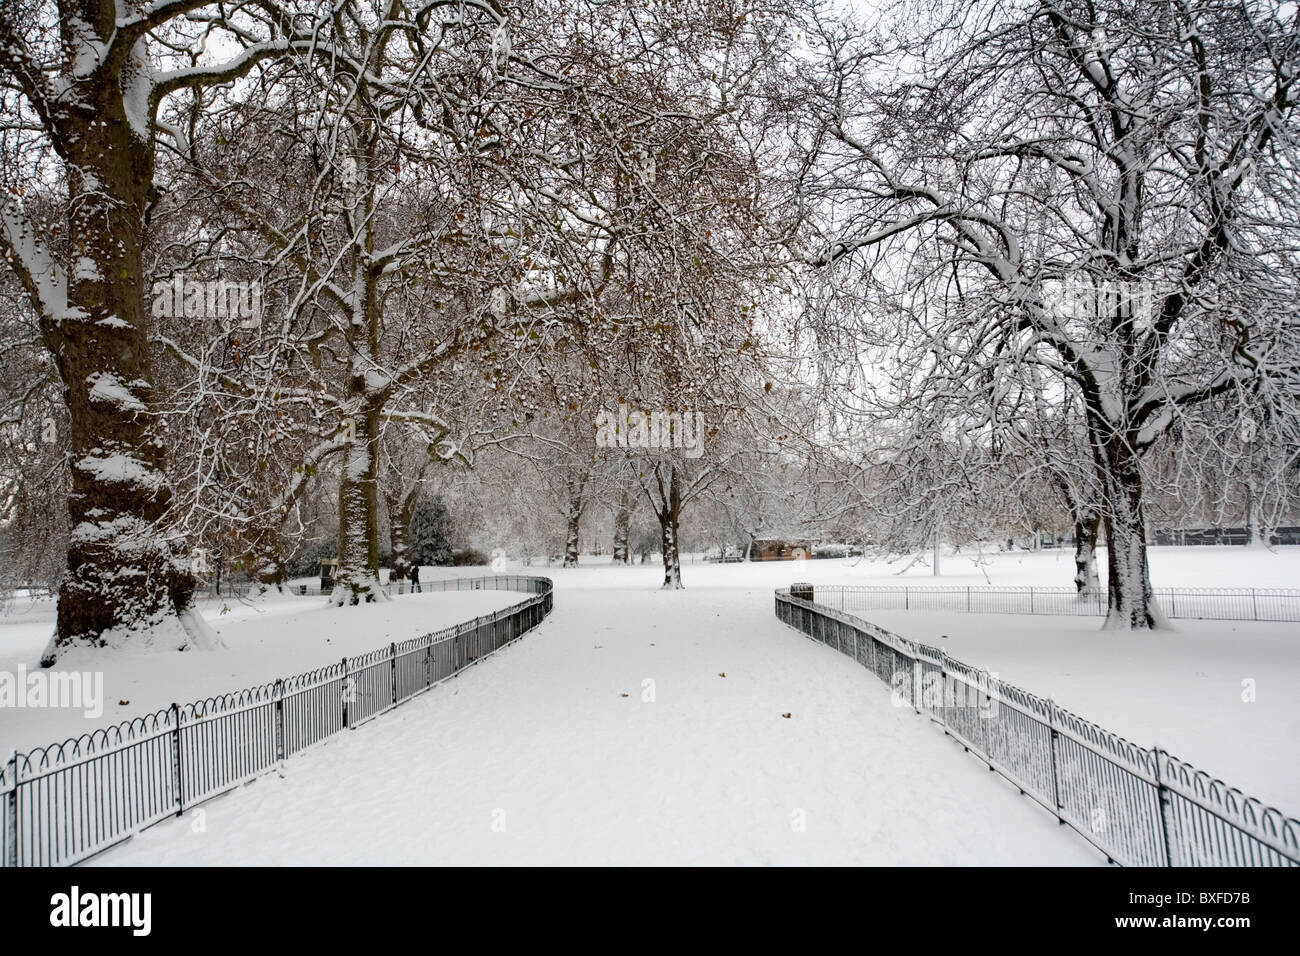 St. James's Park covered with snow, London, England, Britain, UK Stock Photo